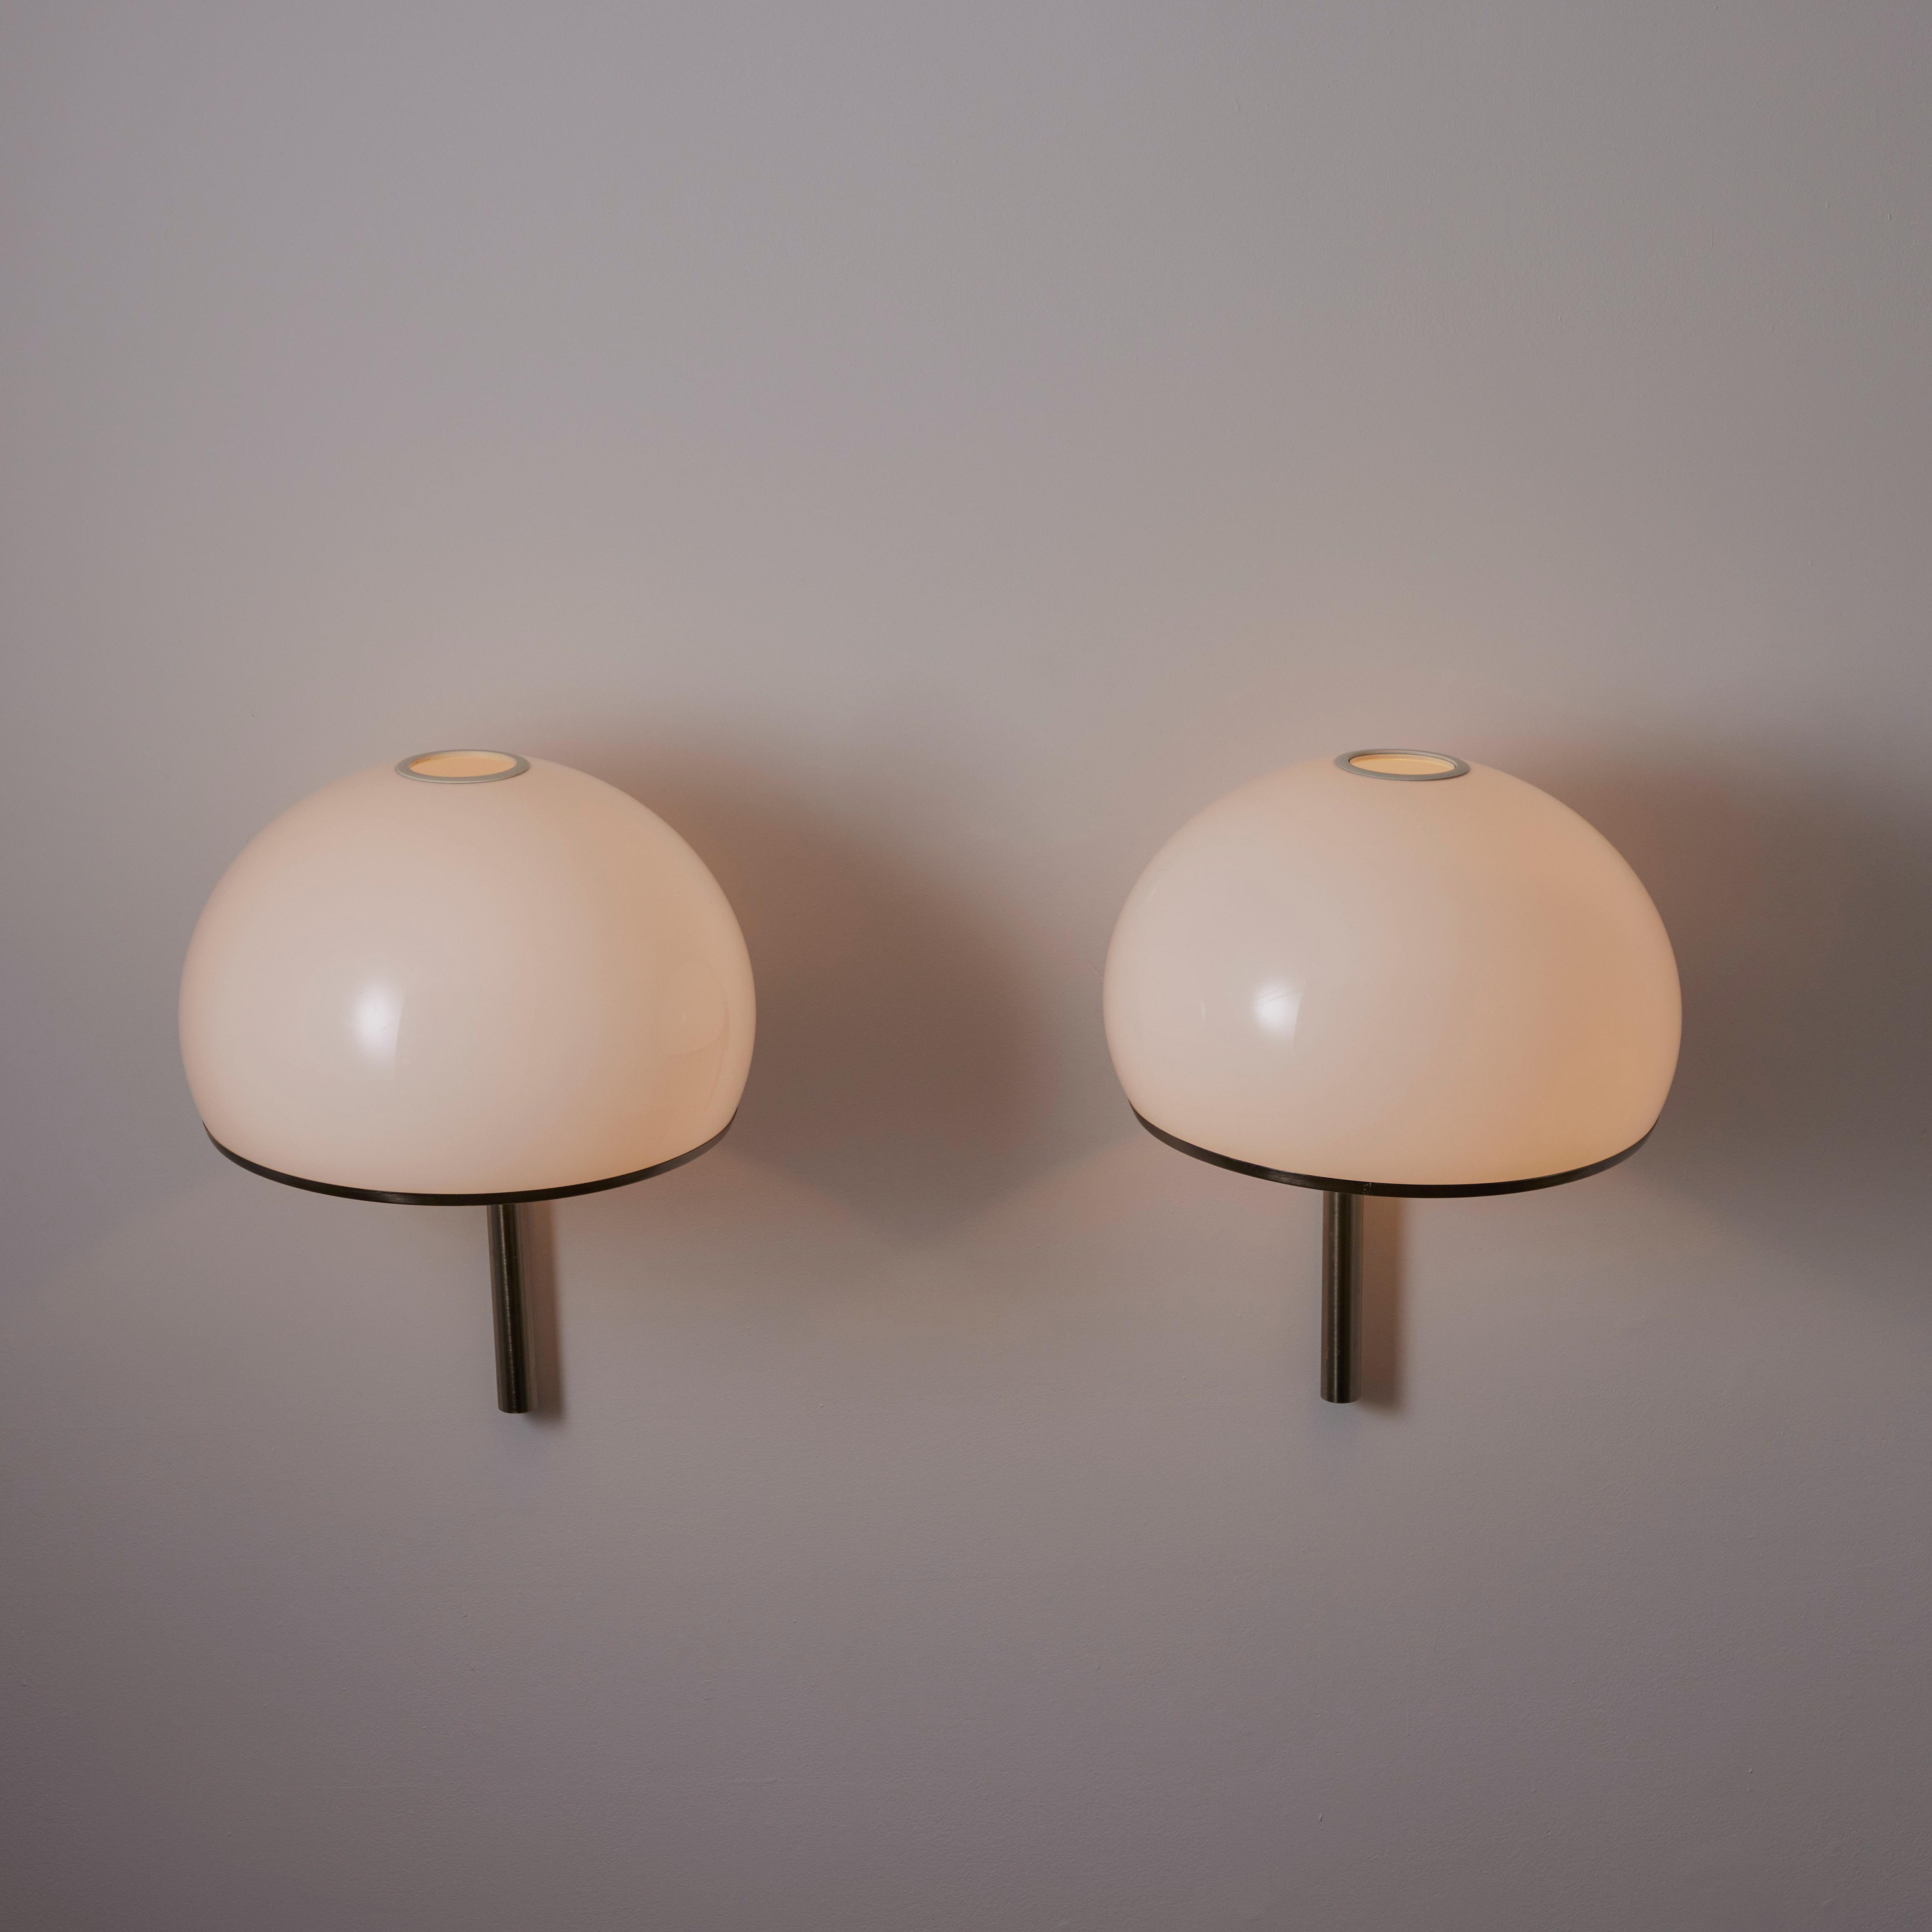 XL Mod. 252/p Sconces by Arteluce In Fair Condition For Sale In Los Angeles, CA